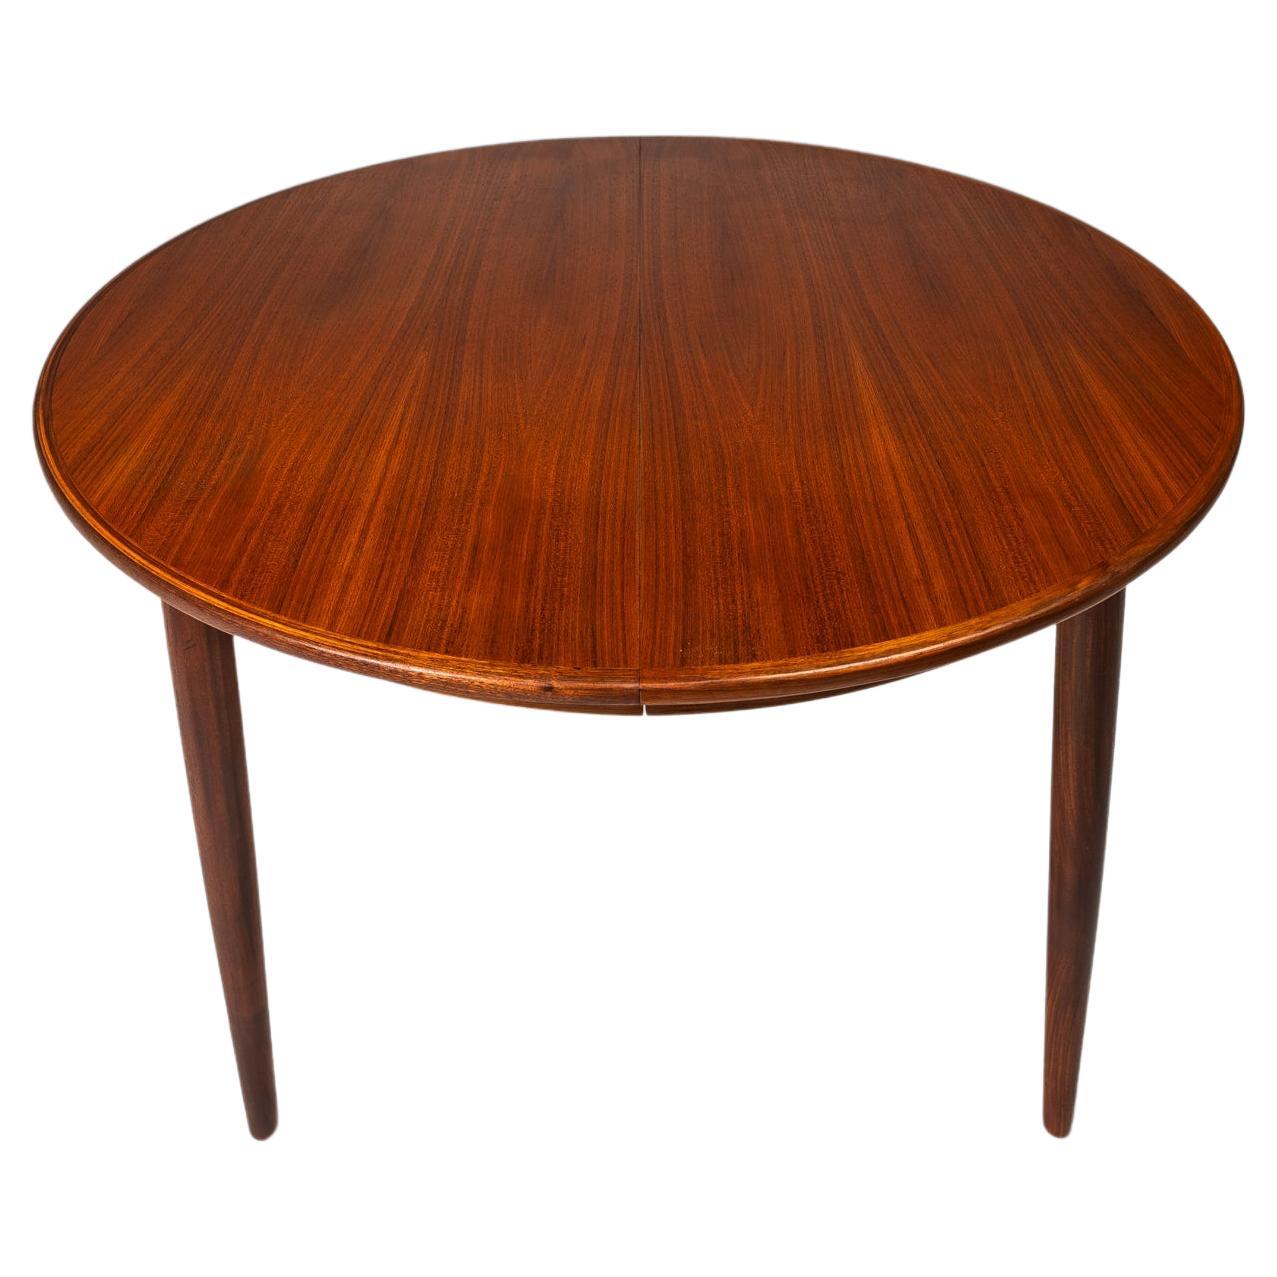 Introducing an elegant, Danish-made expansion dining table constructed by Gudme Møbelfabrik in the late 1960's. Equal parts beauty and functionality this extraordinary extension dining table is in 100% original, vintage condition. Constructed from a